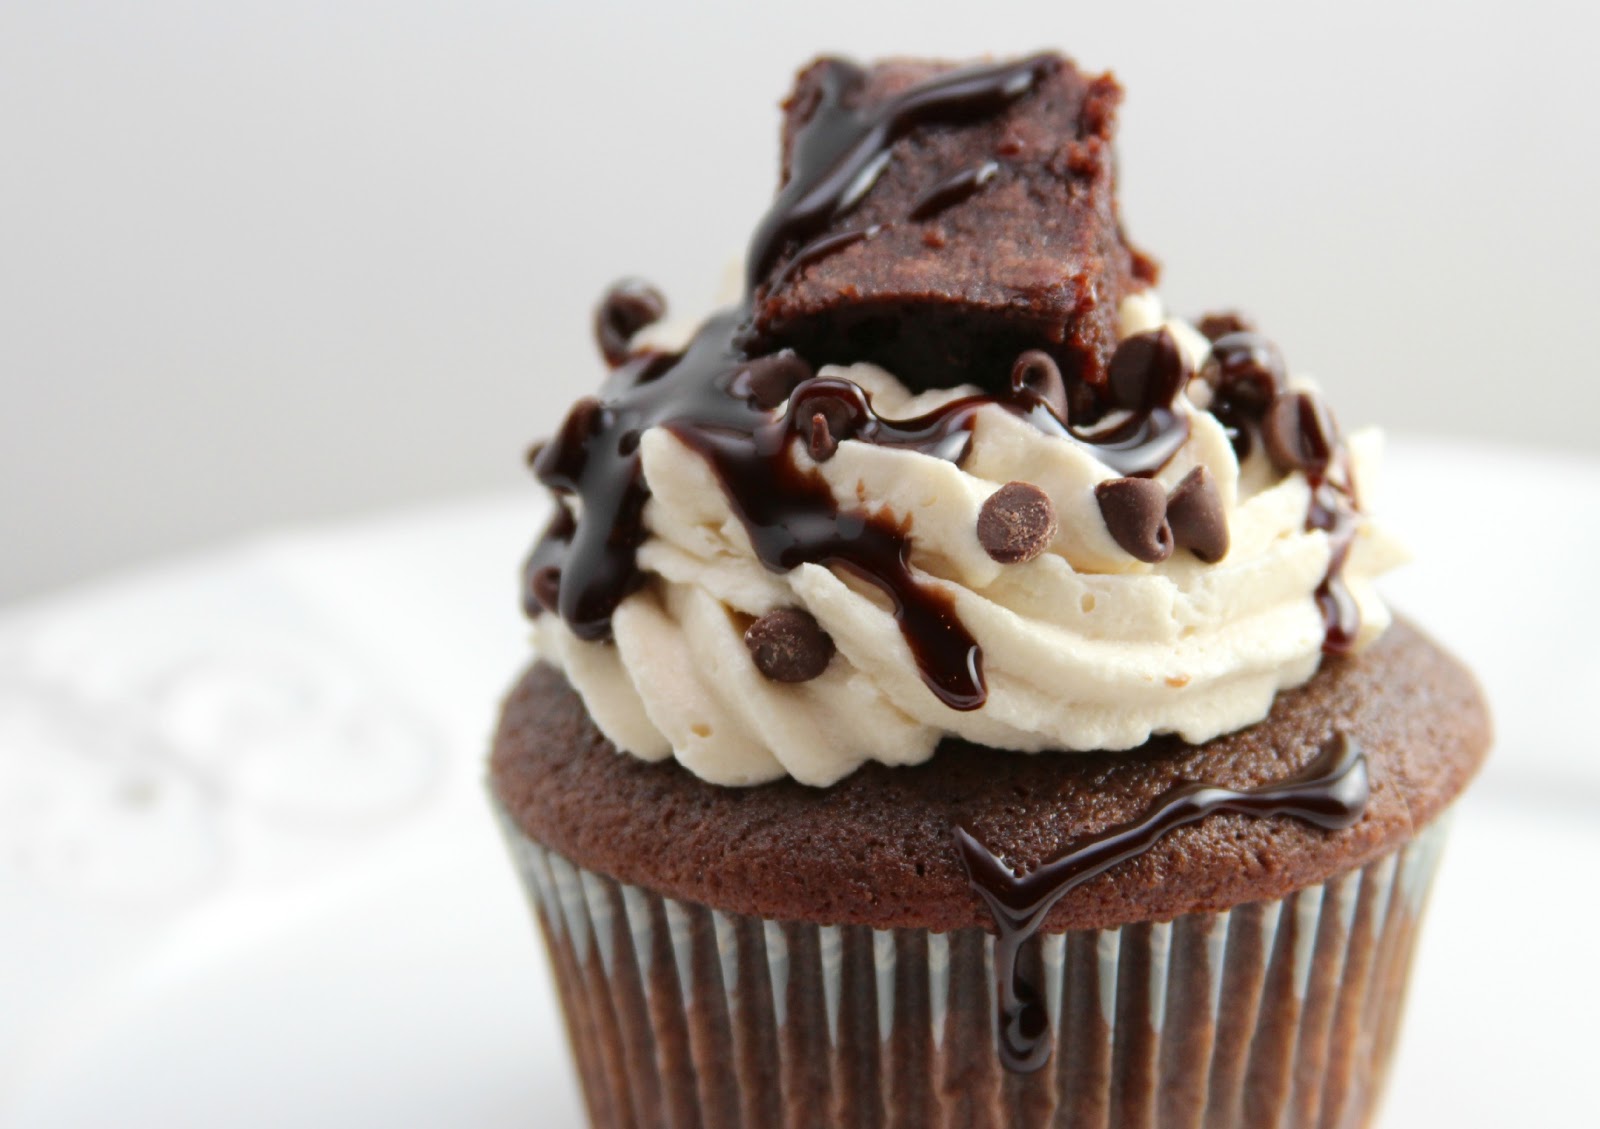 Cookie Dough Cupcakes with Chocolate Frosting